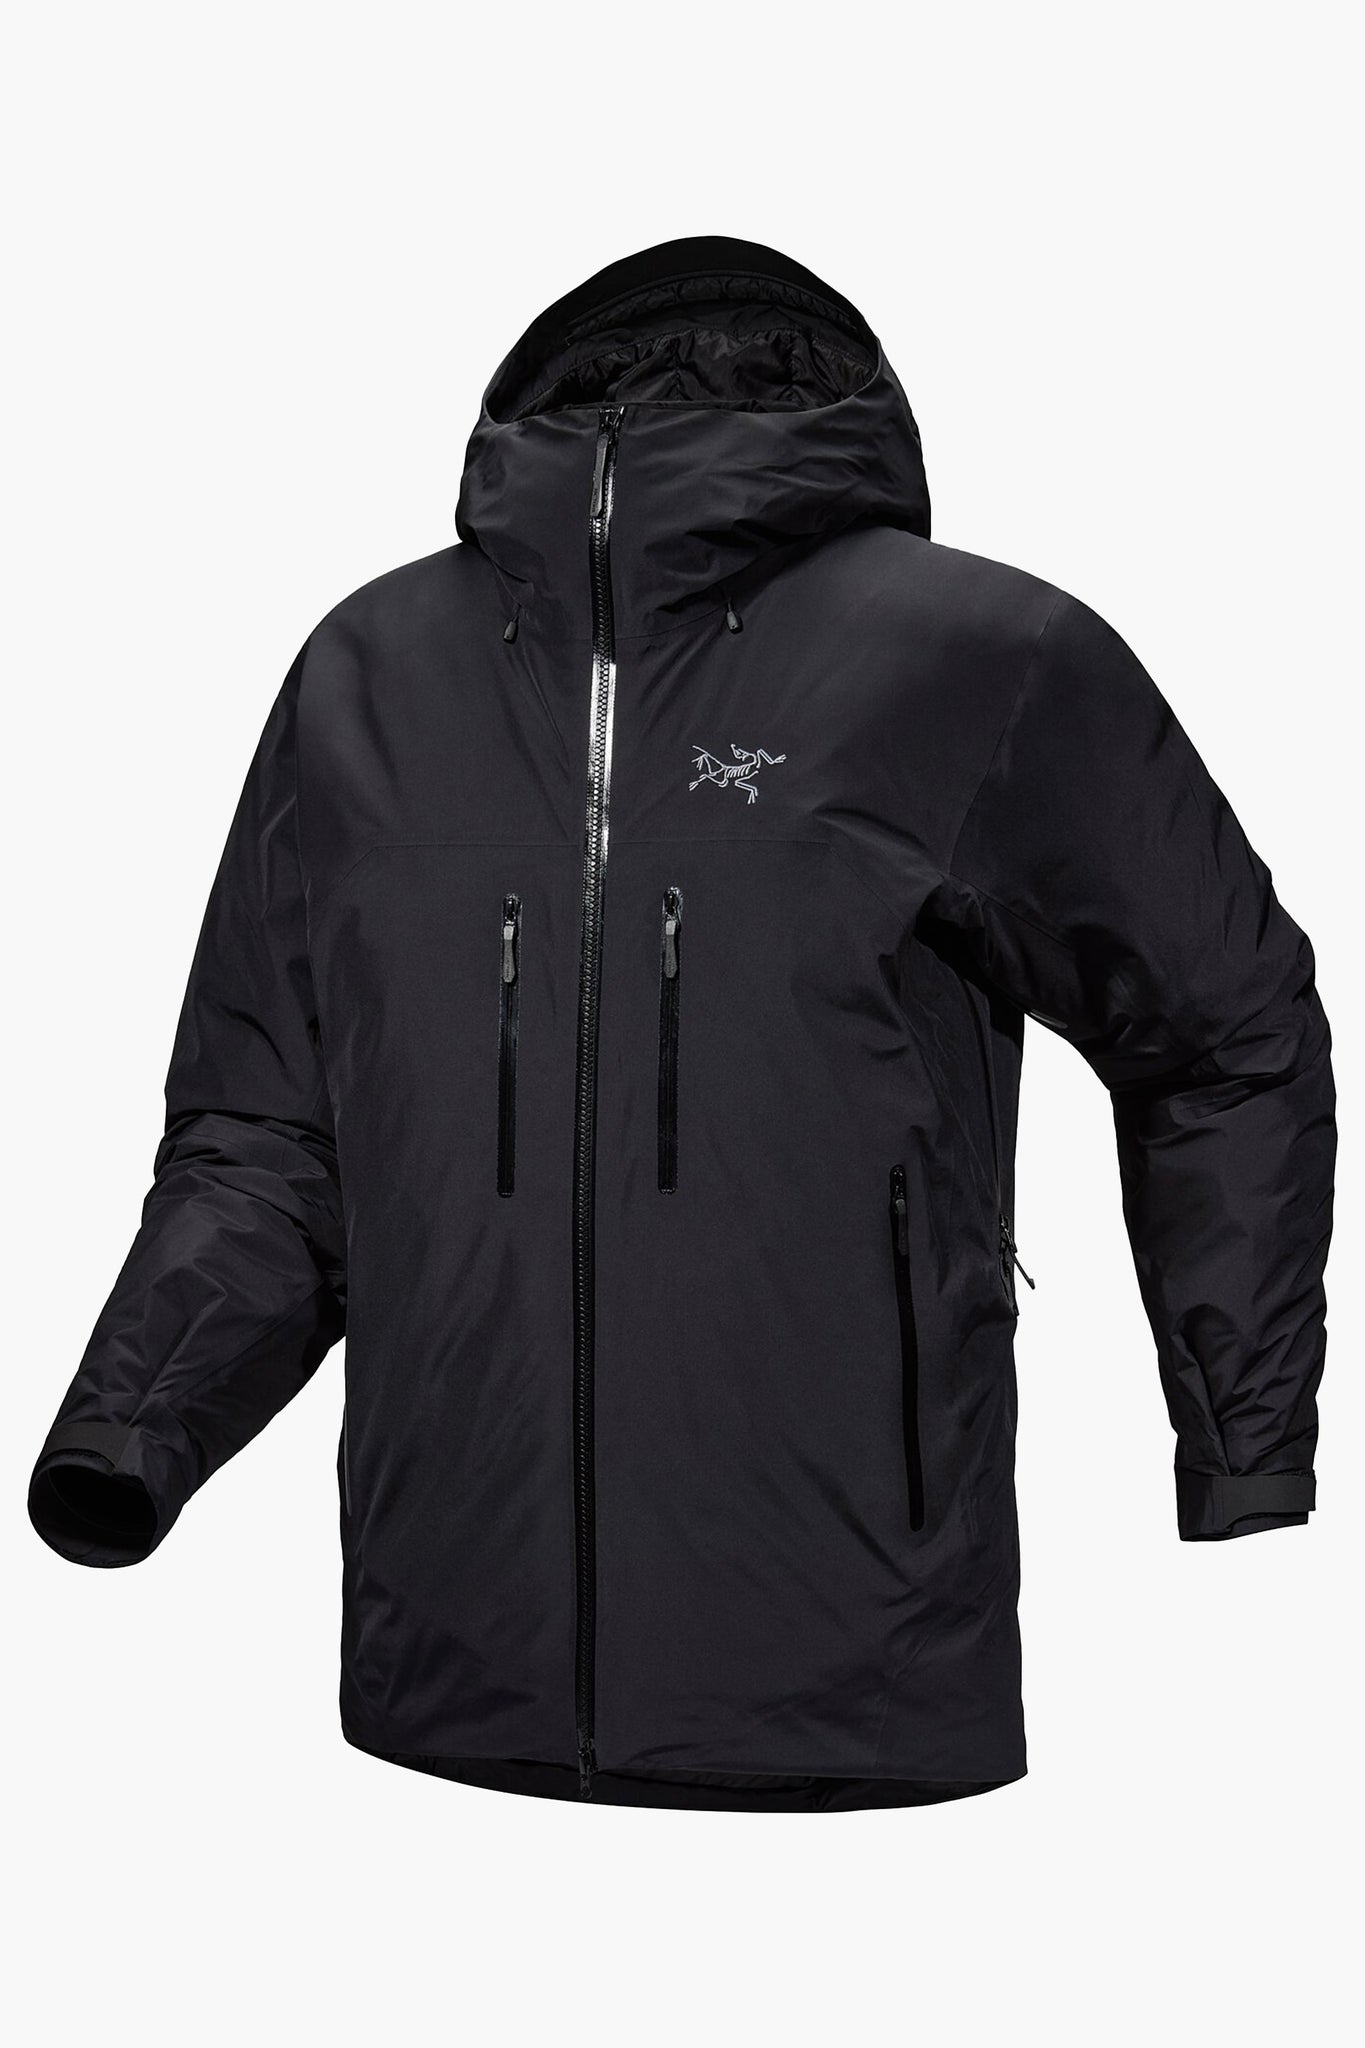 Arc'teryx Men's Beta Down Insulated Jacked in Black